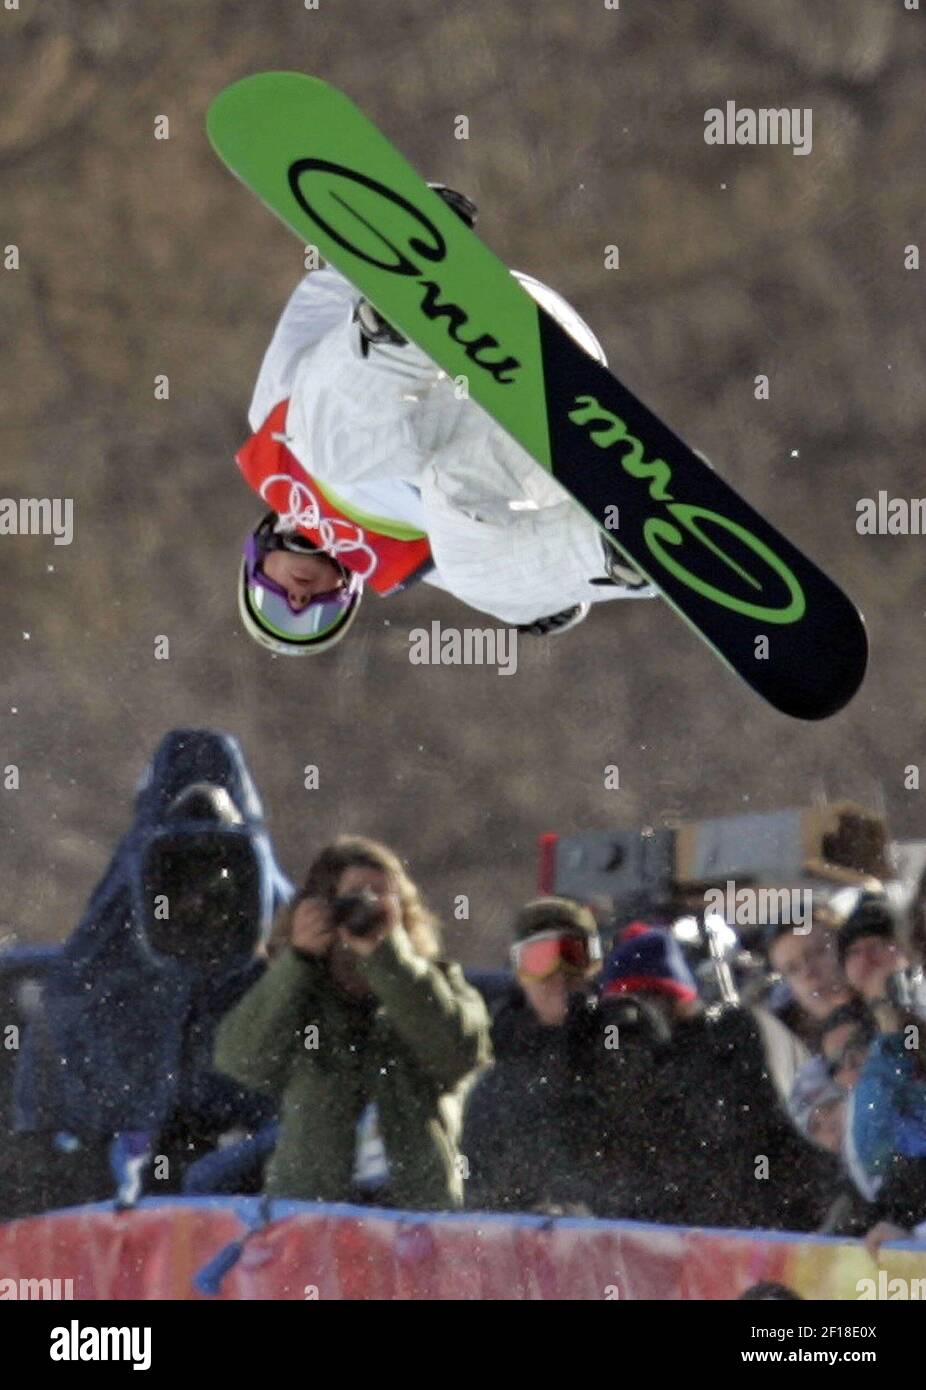 Daniel Kass, of the USA, completes his run to win the silver medal in the Men's Halfpipe snowboard competition in Bardonecchia on Sunday, February 12, 2006 during the 2006 Winter Games. (Photo by Joe Rimkus Jr./Miami Herald/KRT) Stock Photo